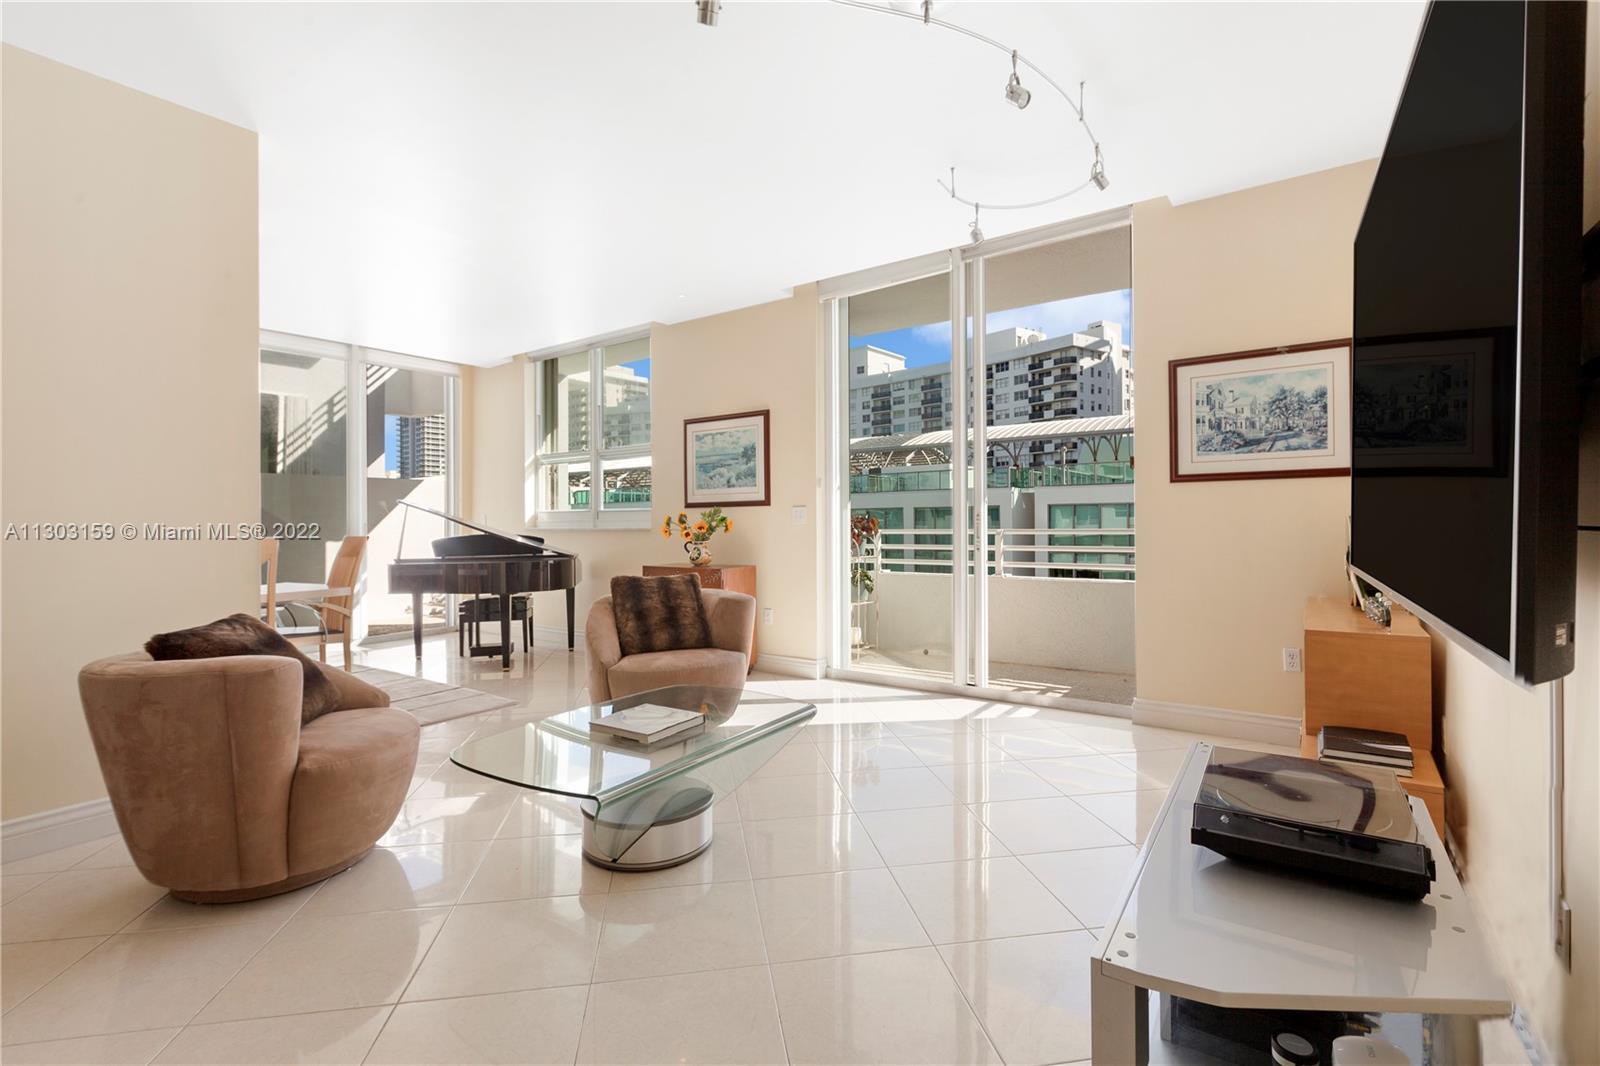 First time on the market. Rare chance to own a Miami Beach penthouse in a modern boutique building a